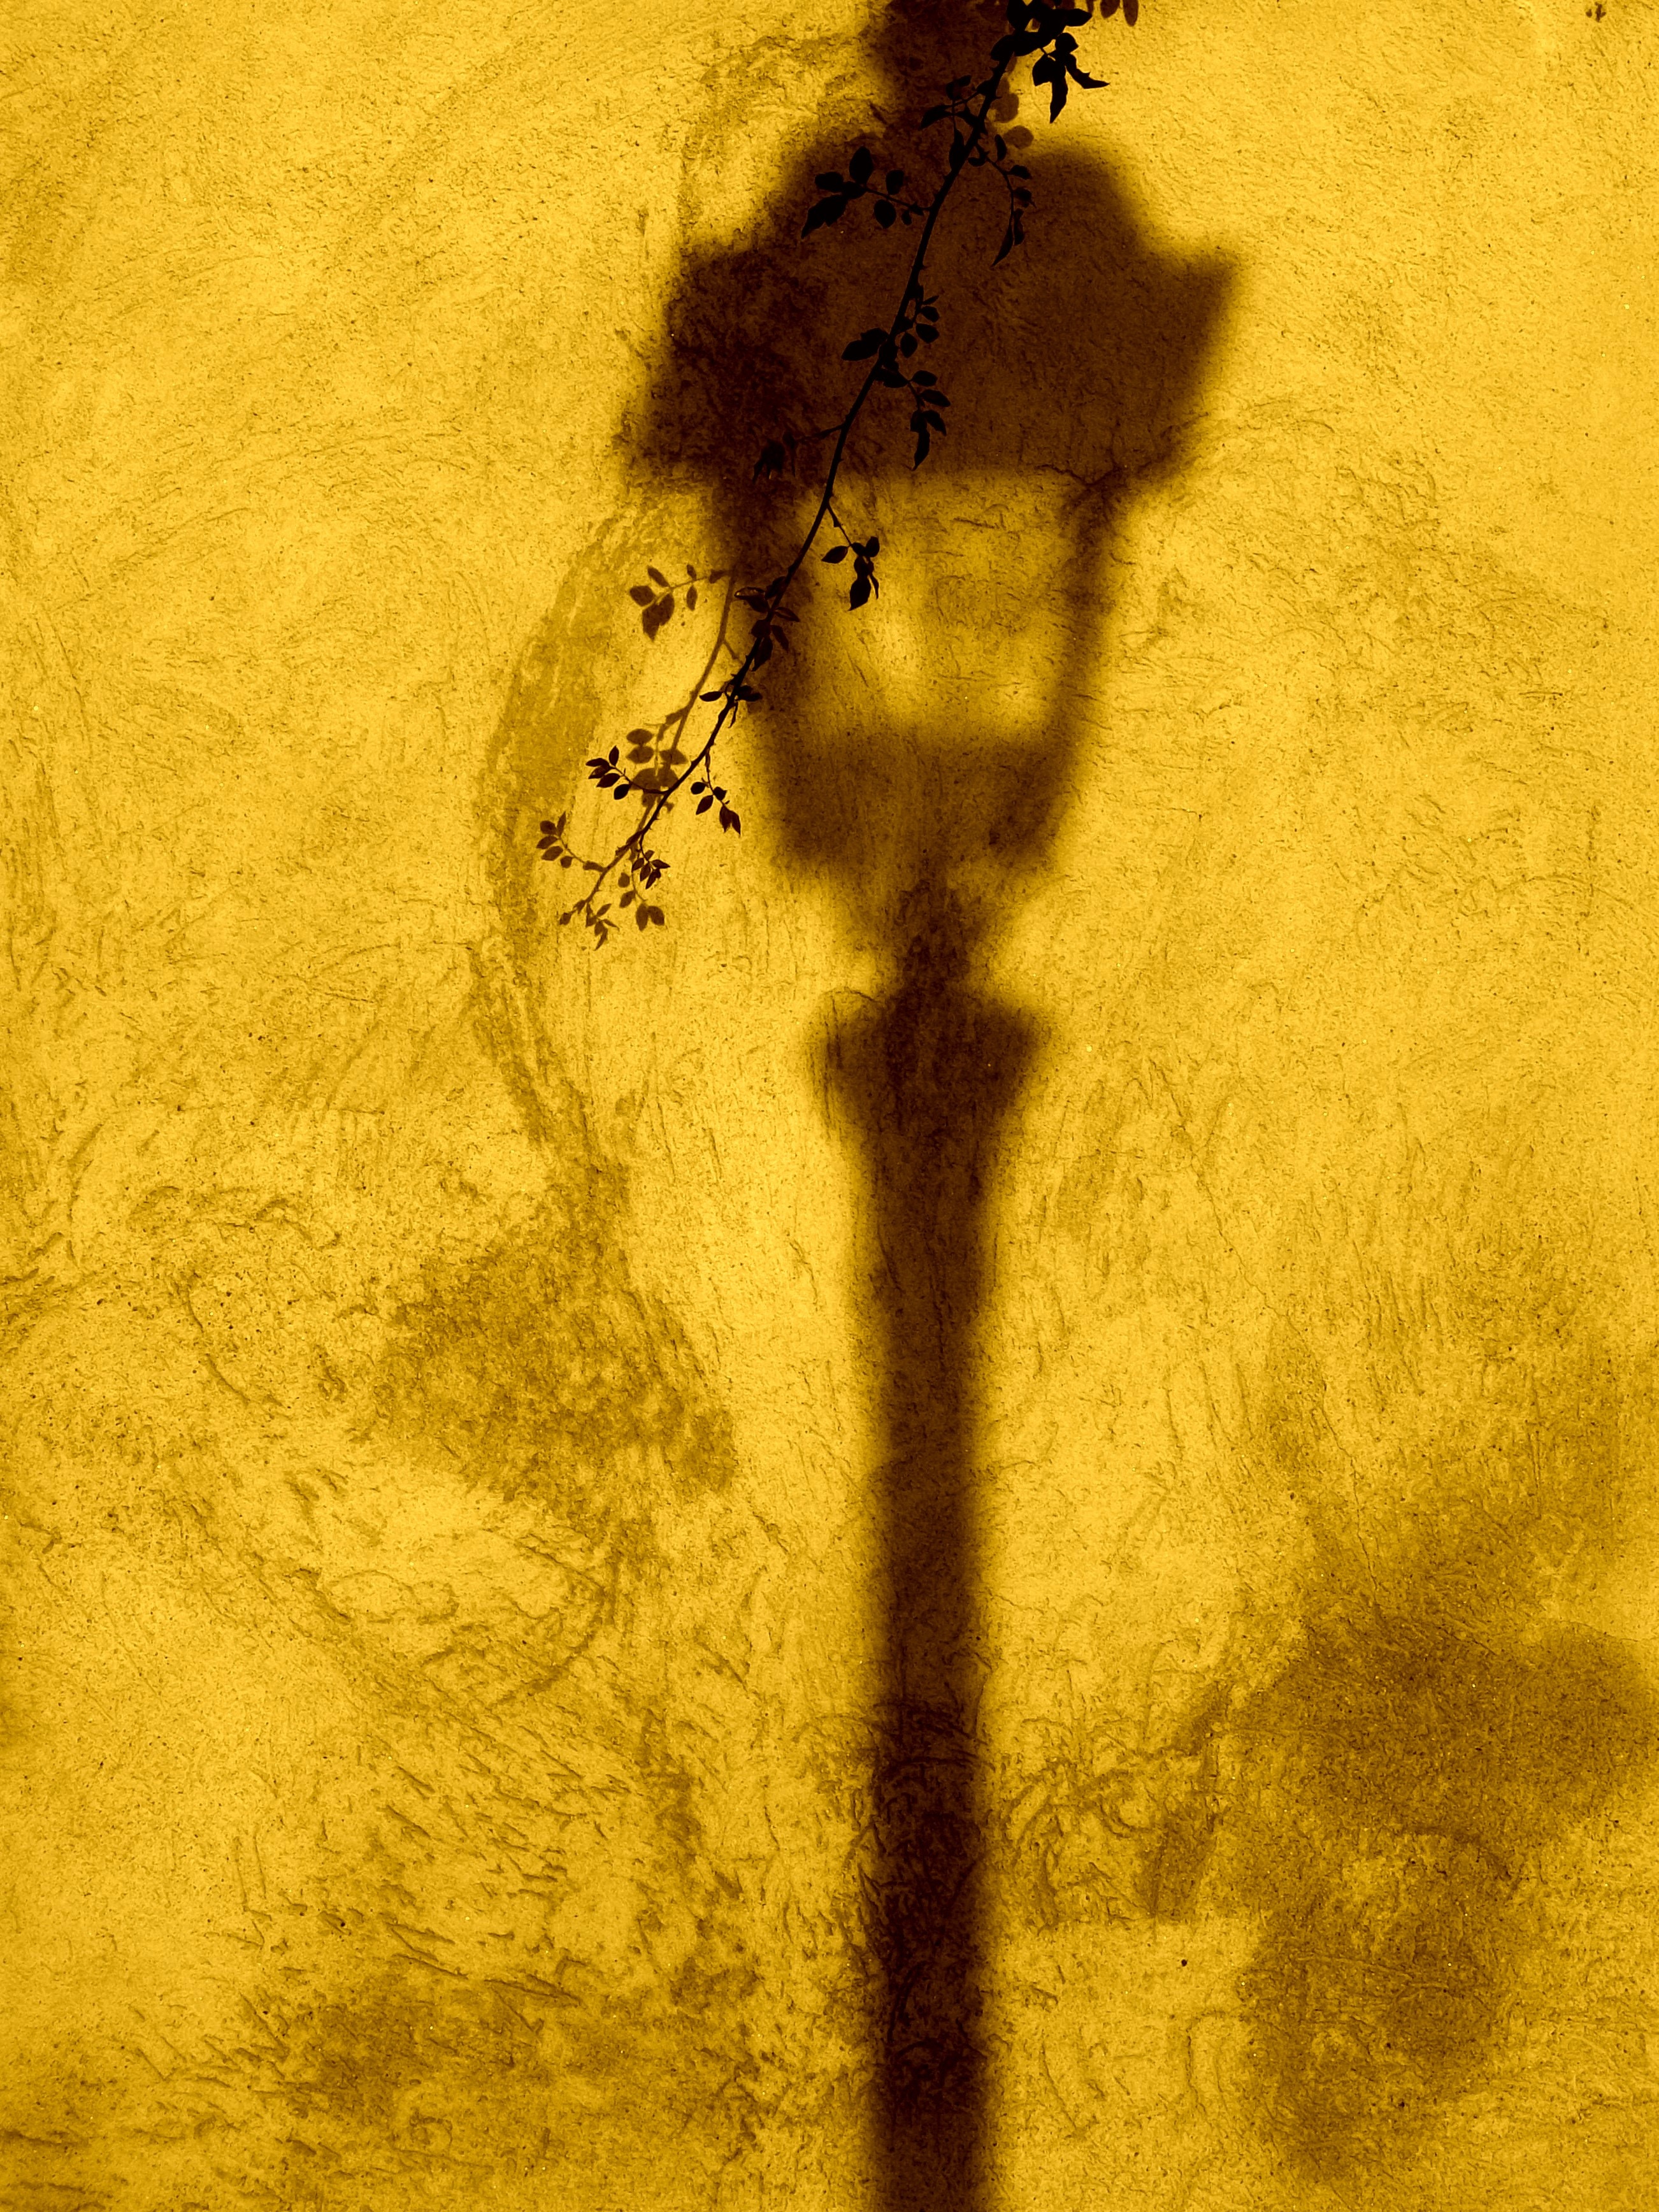 lantern, lamp, yellow, texture, textures, branch, shadow, wall Aesthetic wallpaper